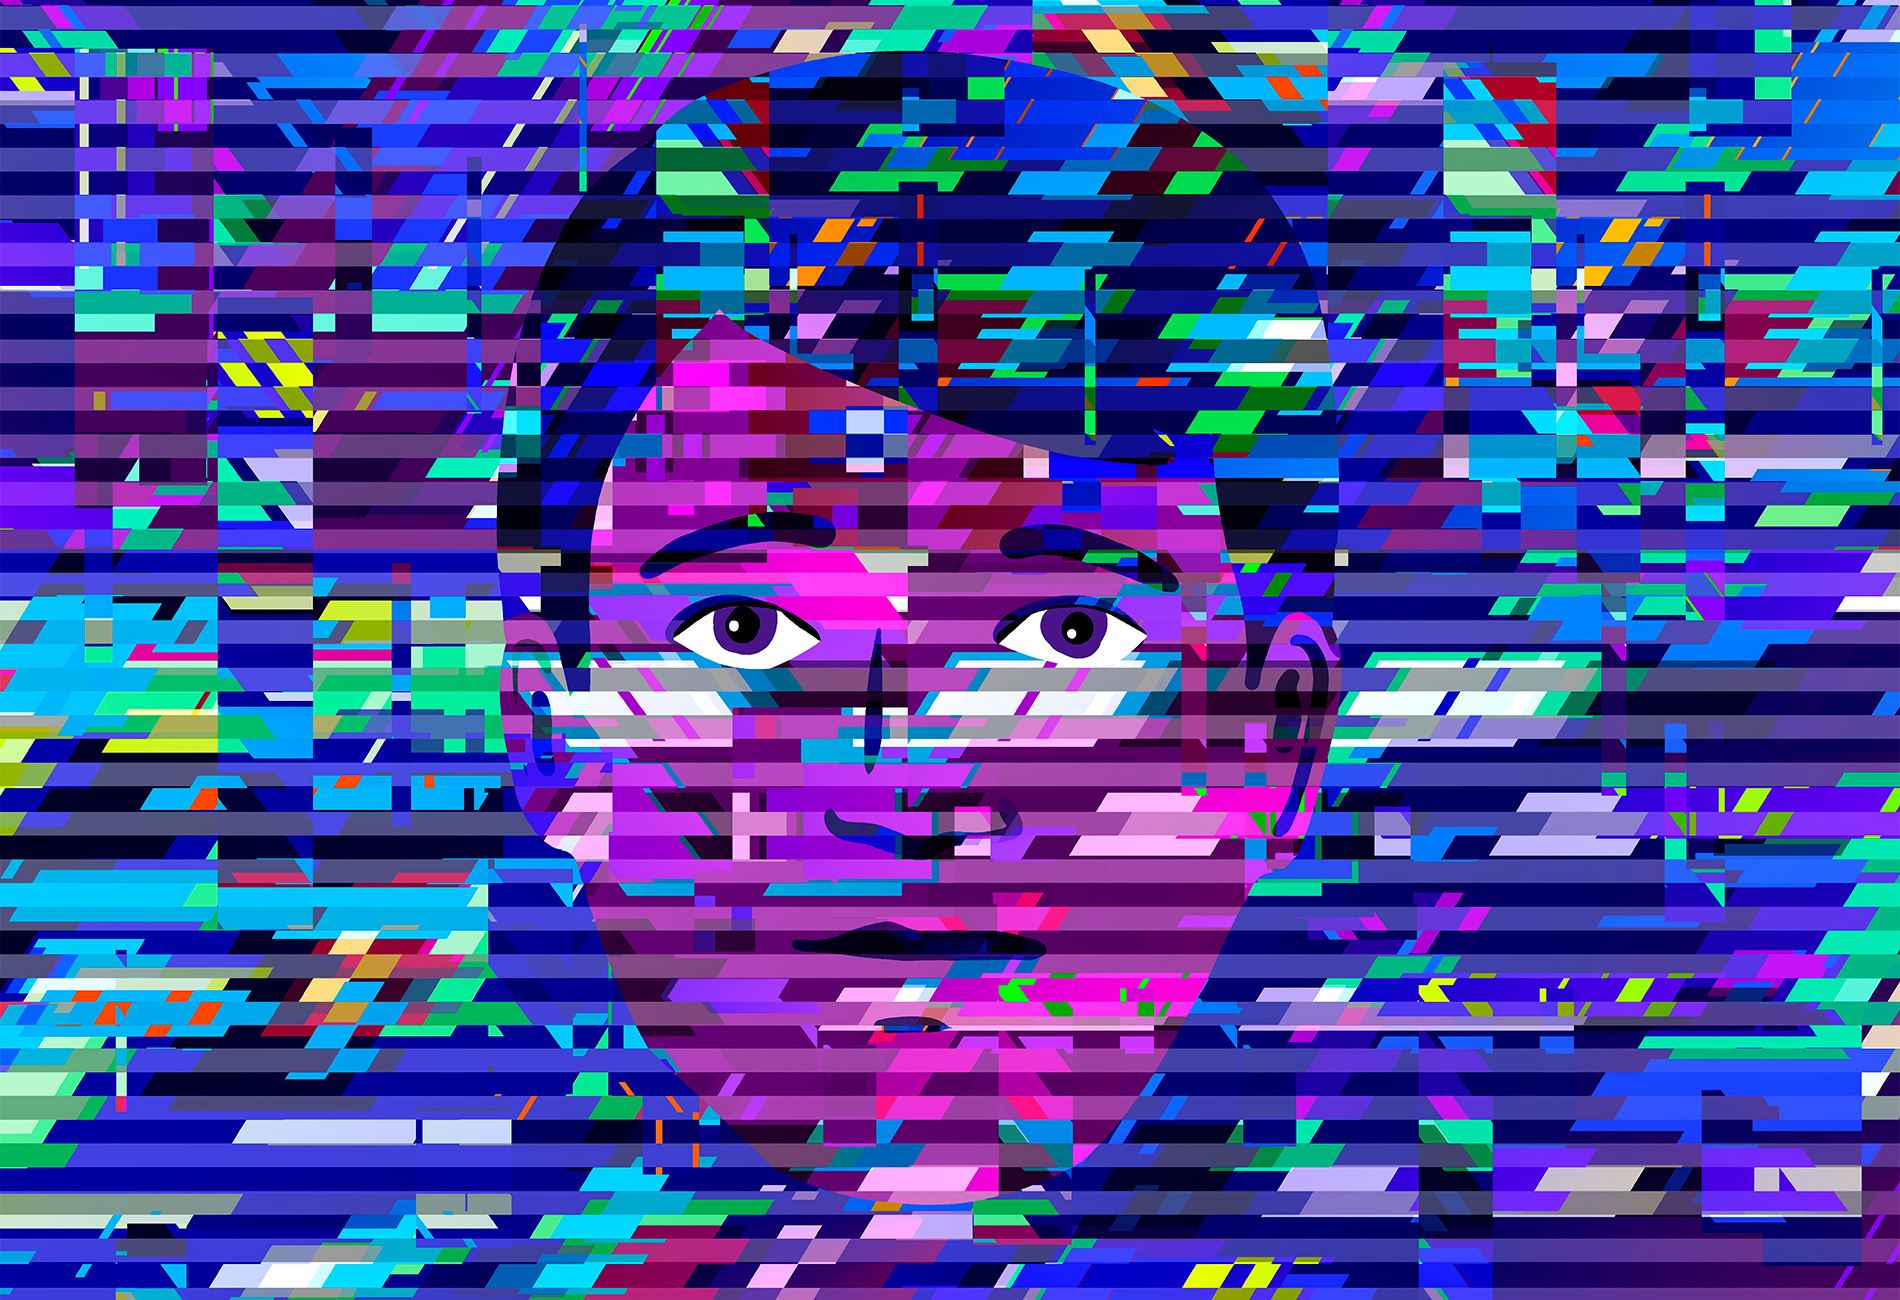 Illustration shows a man's face emerging from genetic data pattern.